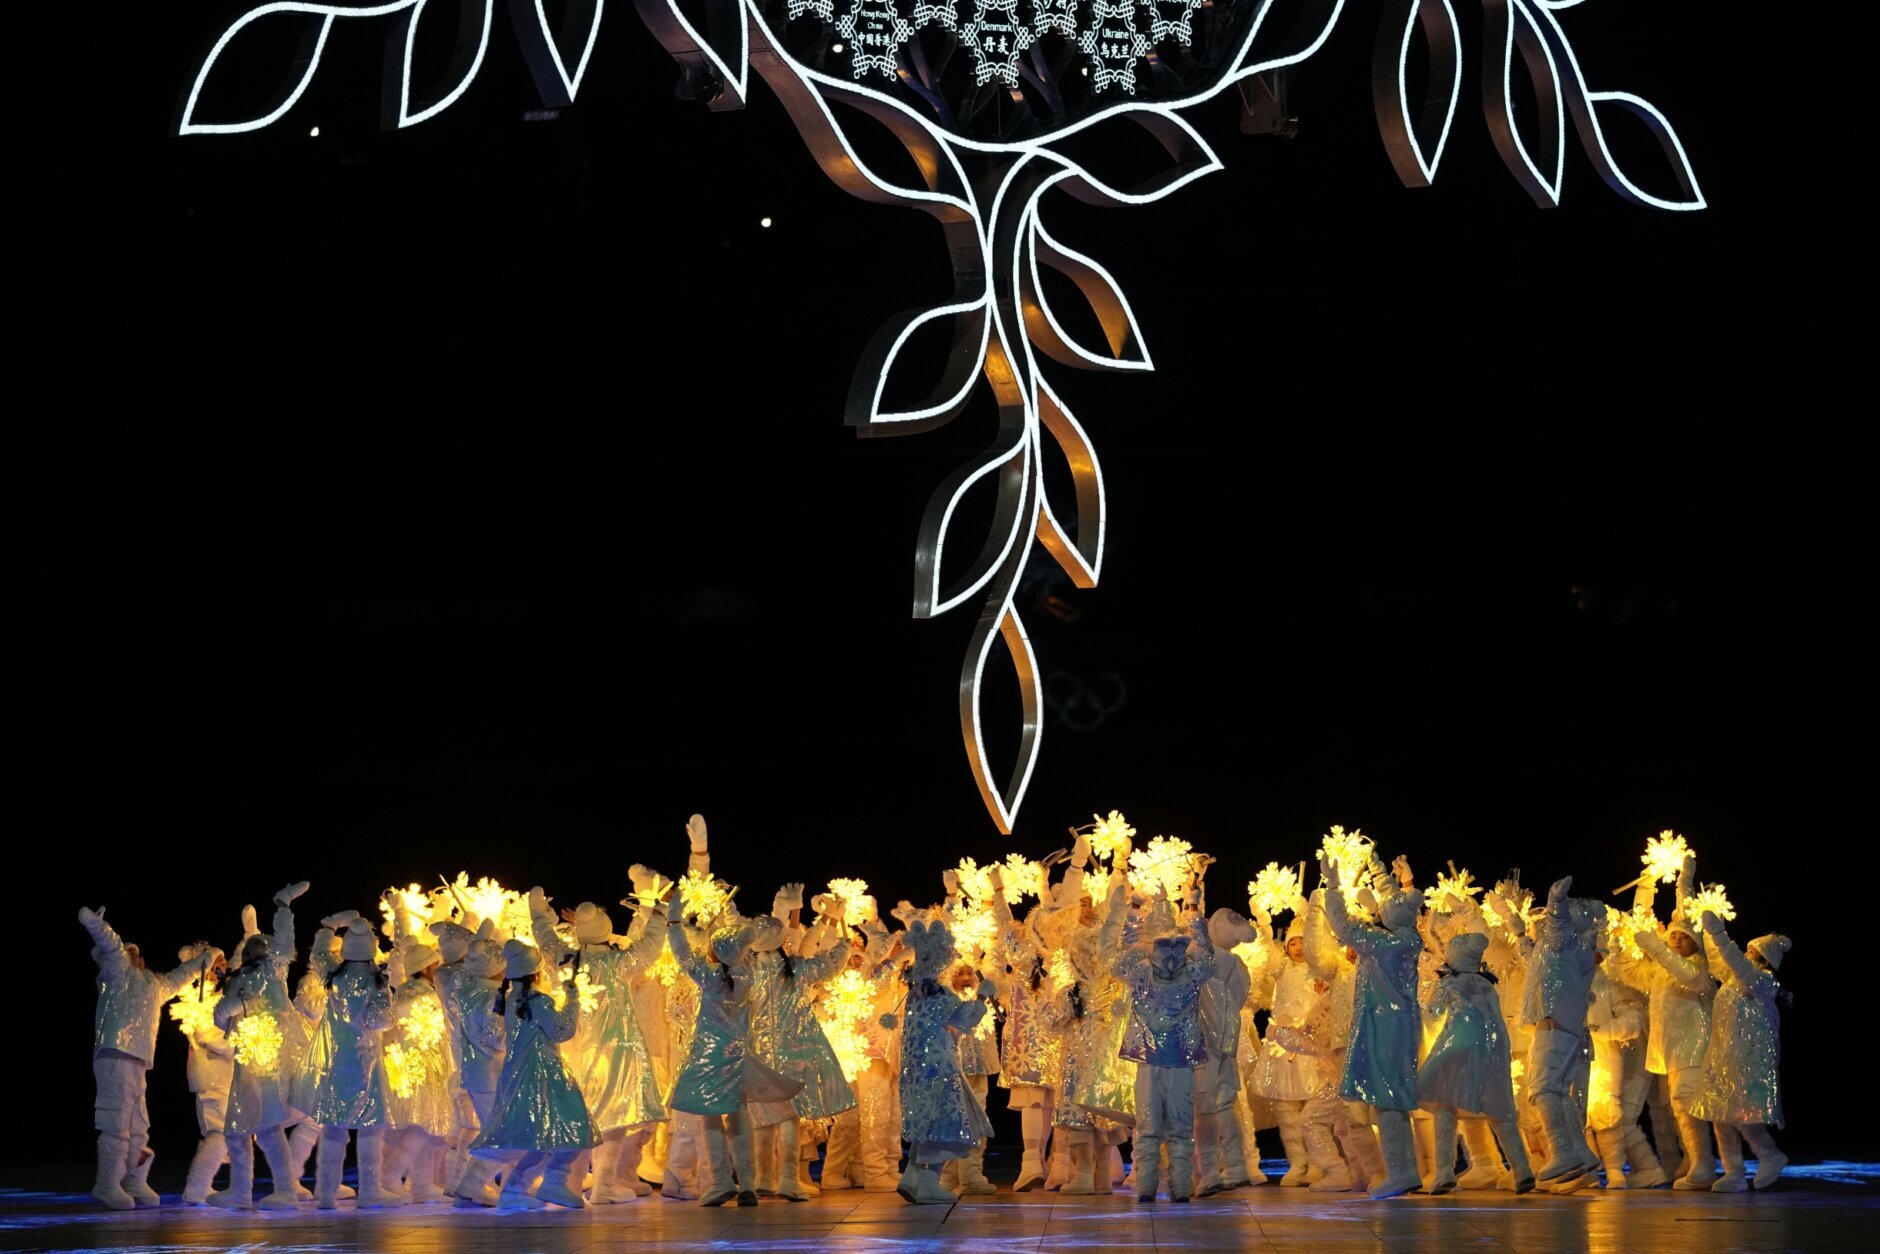 Dancers perform during the closing ceremony of the 2022 Winter Olympics, Sunday, Feb. 20, 2022, in Beijing. (AP Photo/Jae C. Hong)